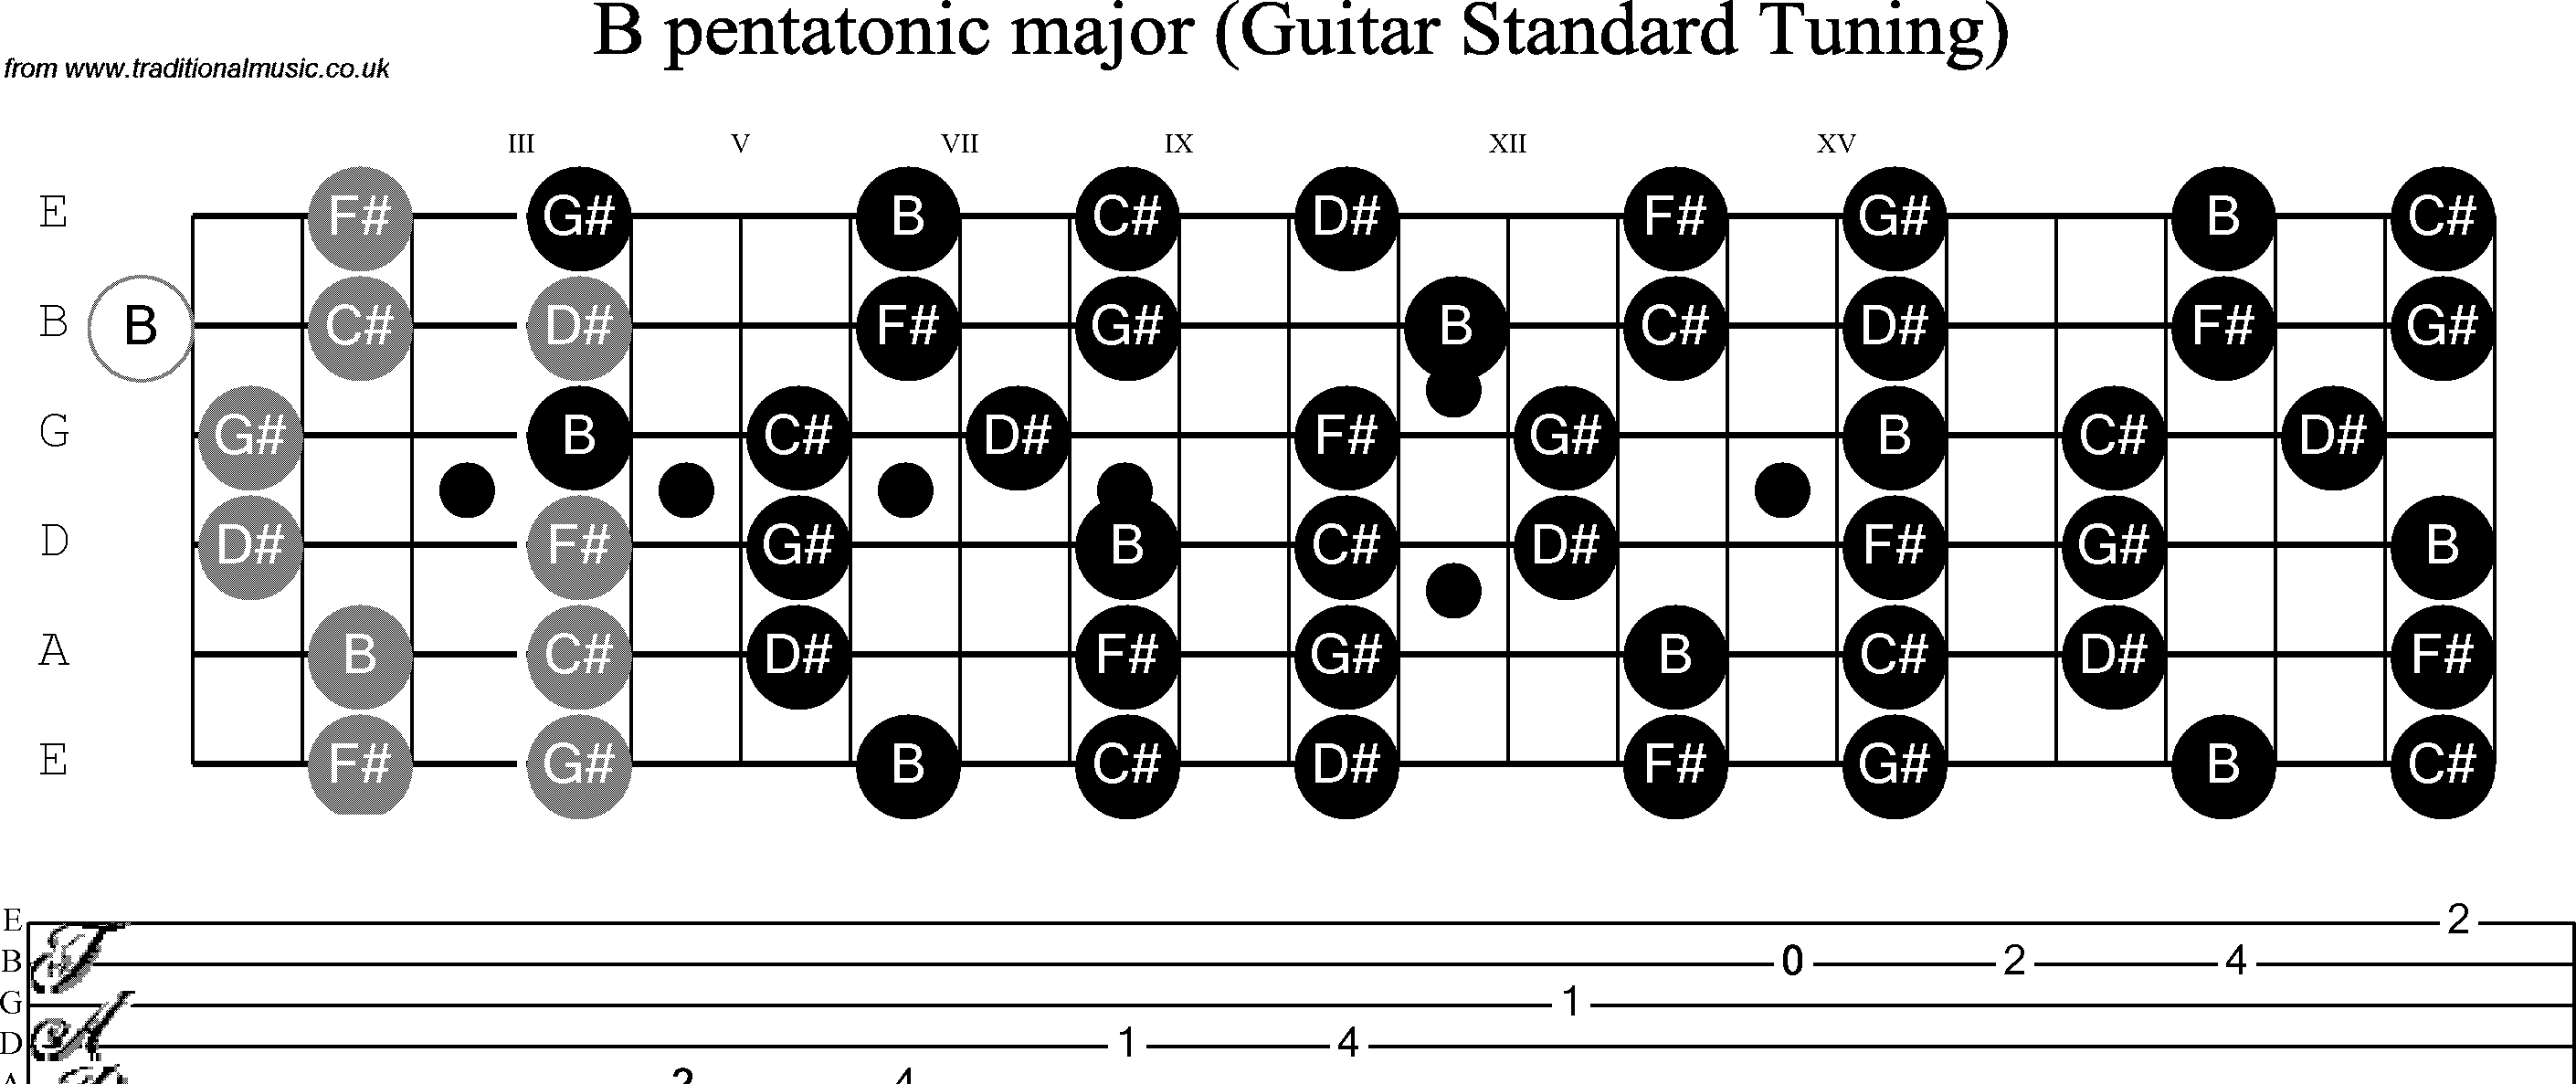 ... to play the notes in the scale on other strings than those shown